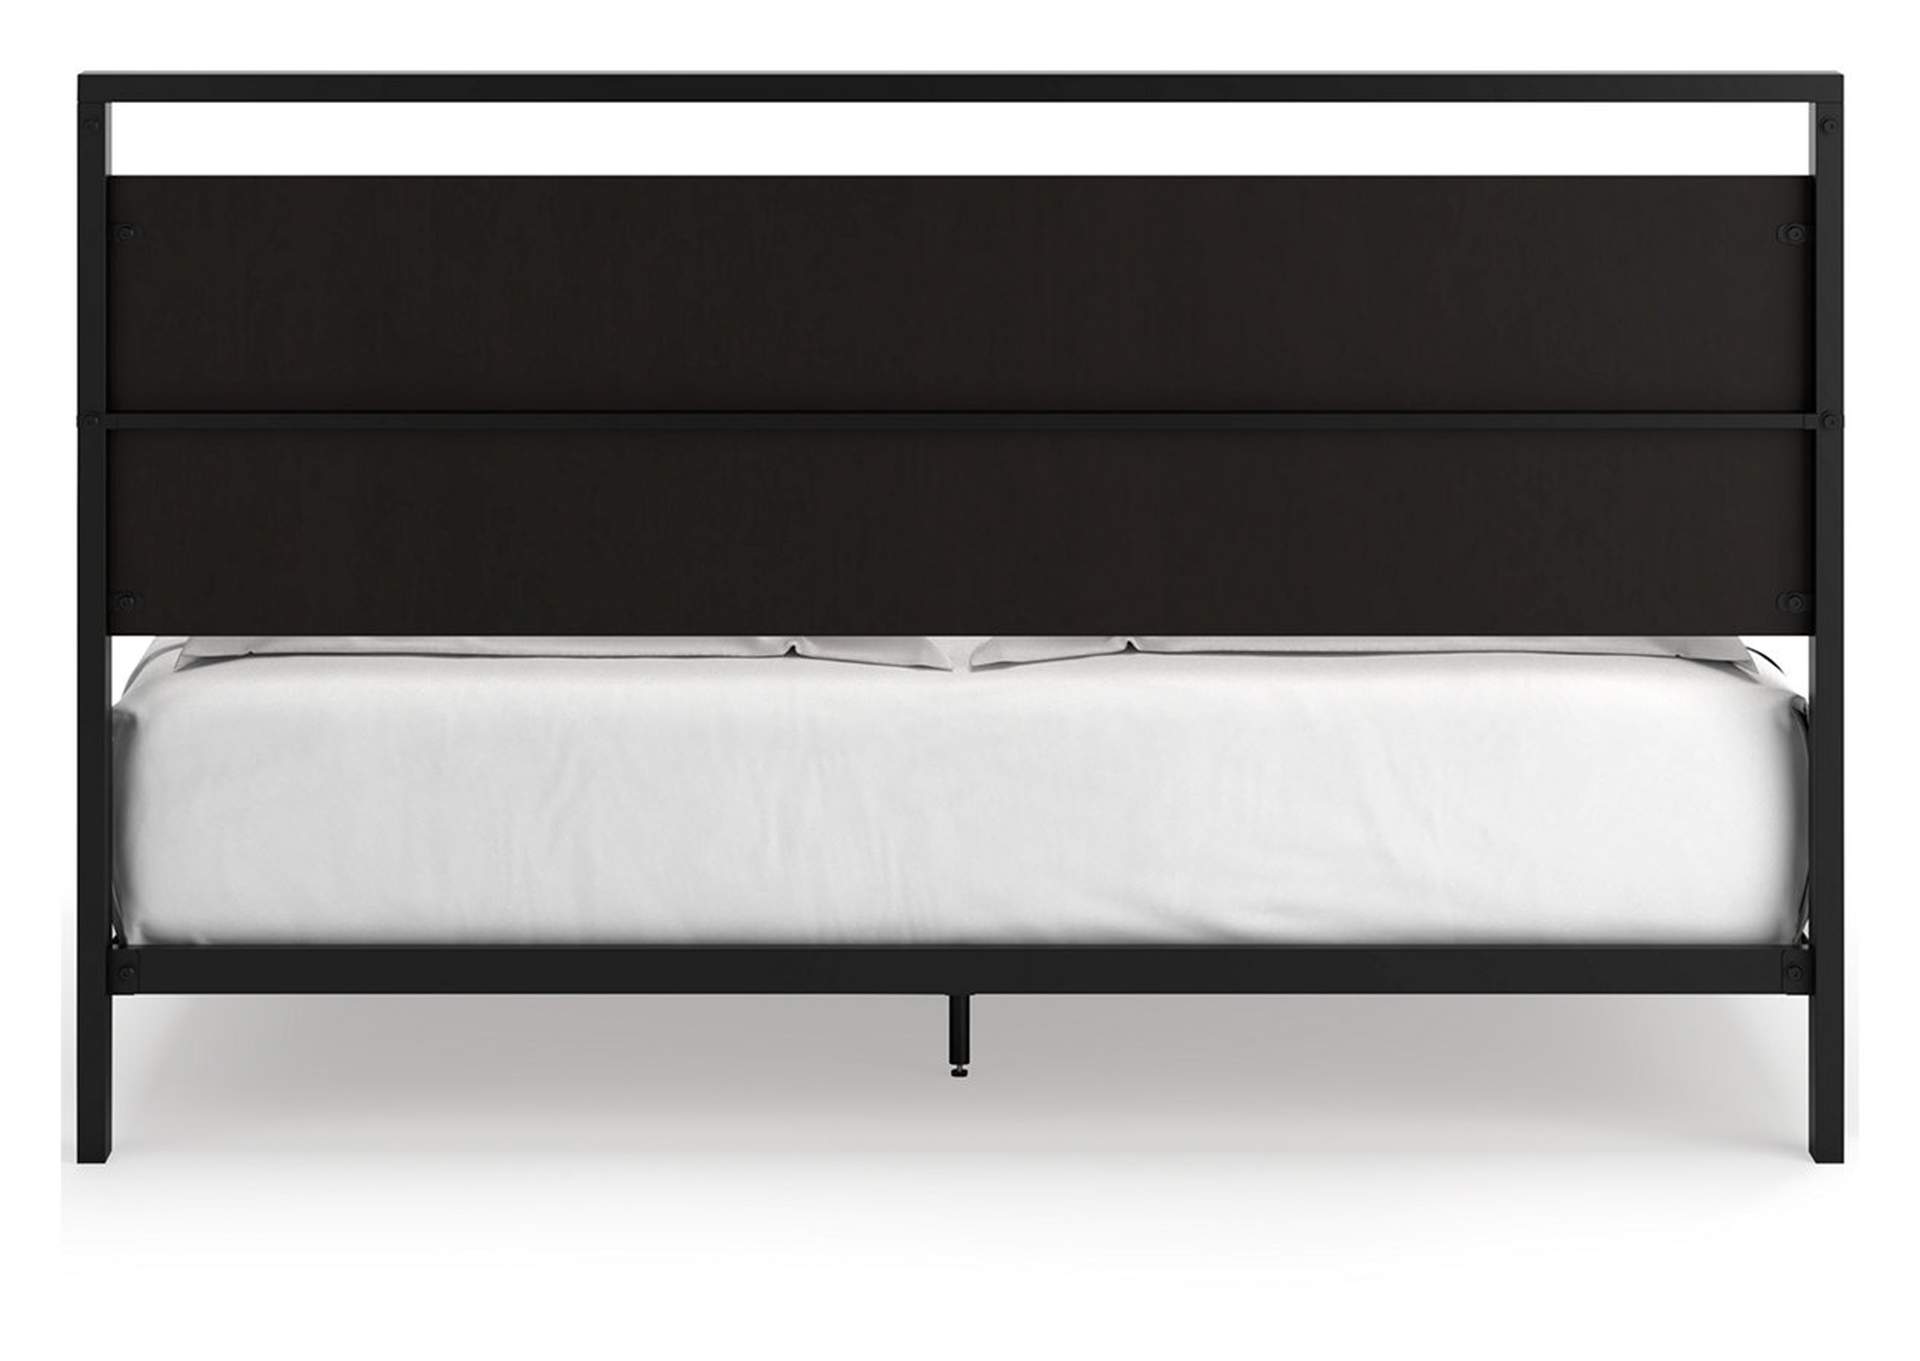 Dontally Queen Platform Bed,Signature Design By Ashley